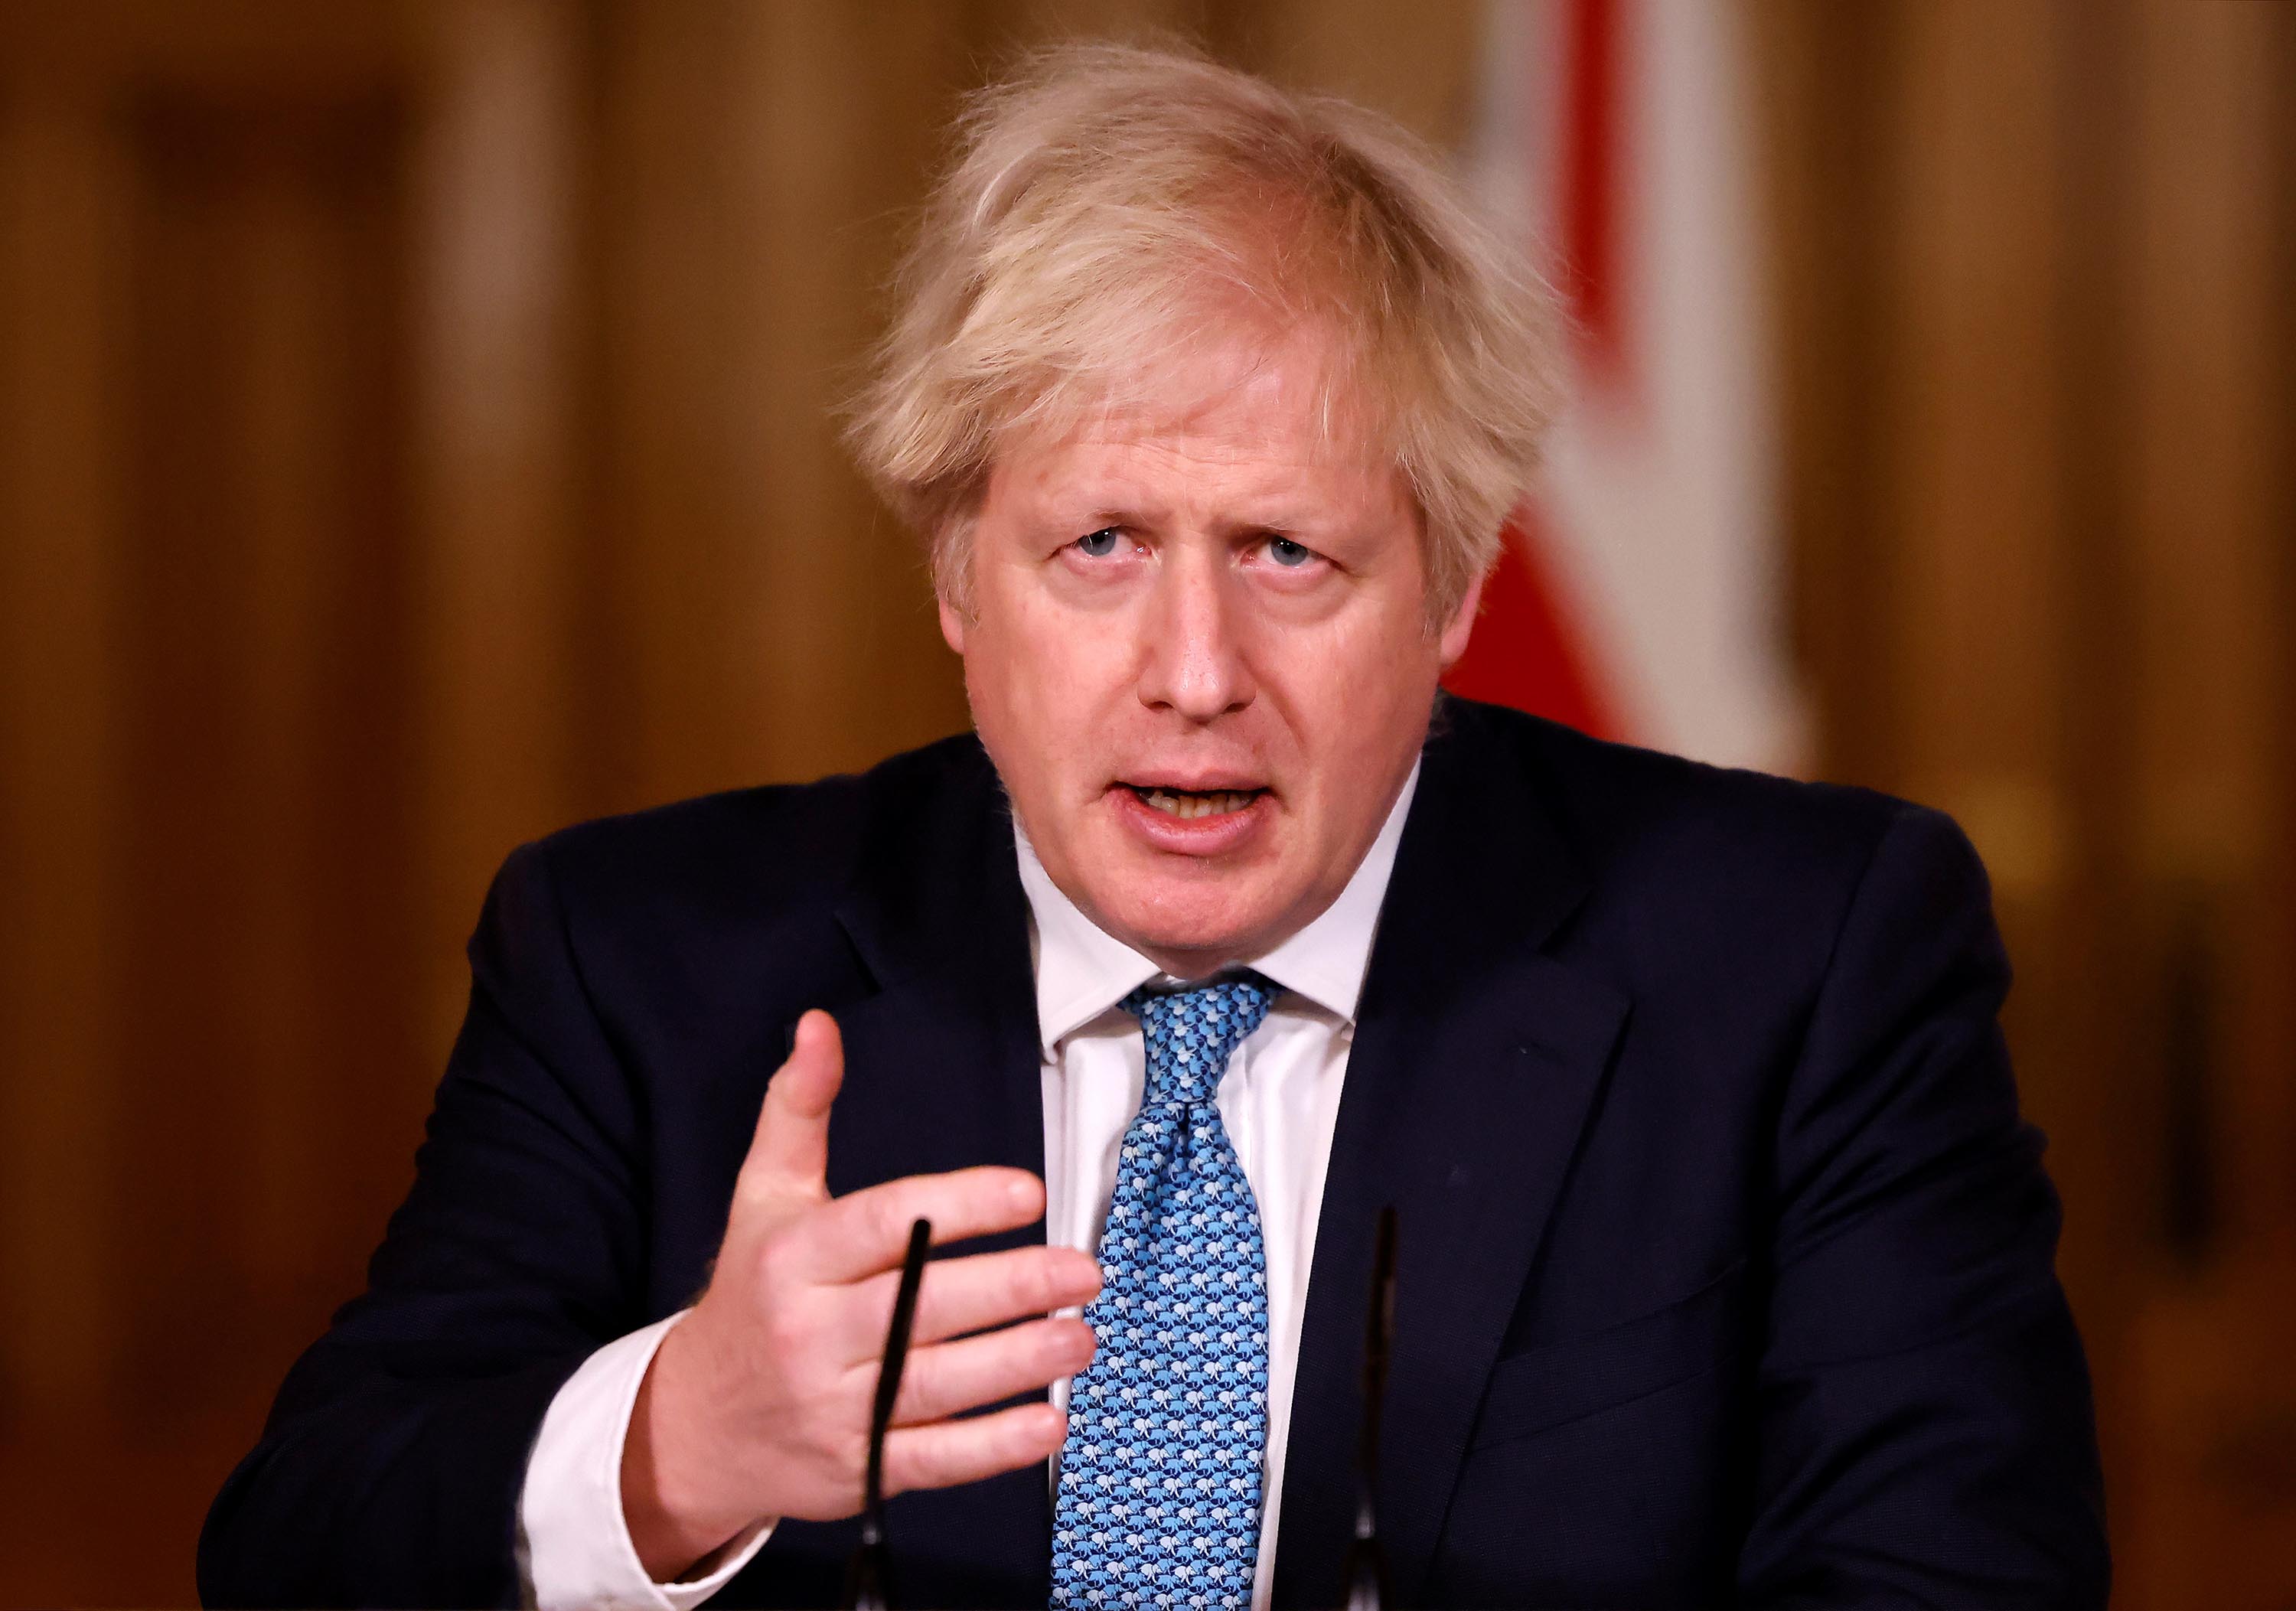 British Prime Minister Boris Johnson speaks during a virtual press conference at No.10 Downing Street in London, on January 7.